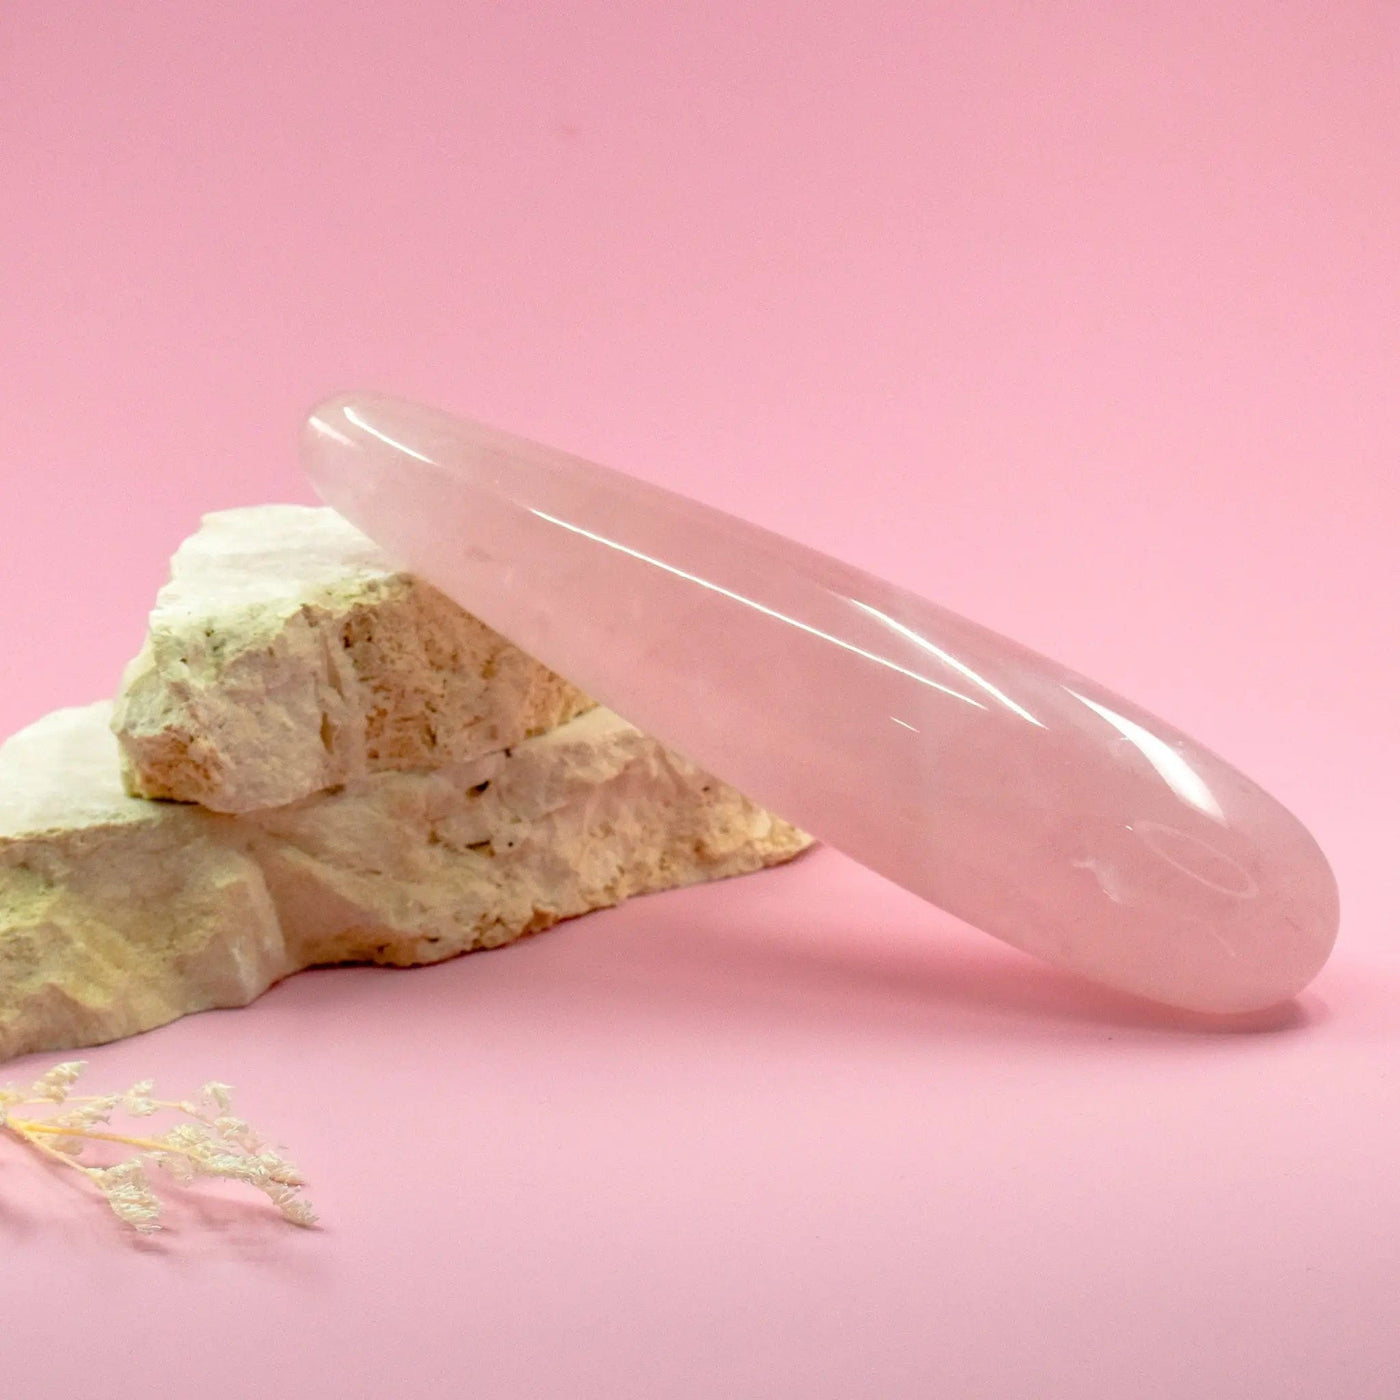 Aphrodite Rose Quartz Wand - Crystal Wands - Wands of Lust Co - Wands of Lust Co